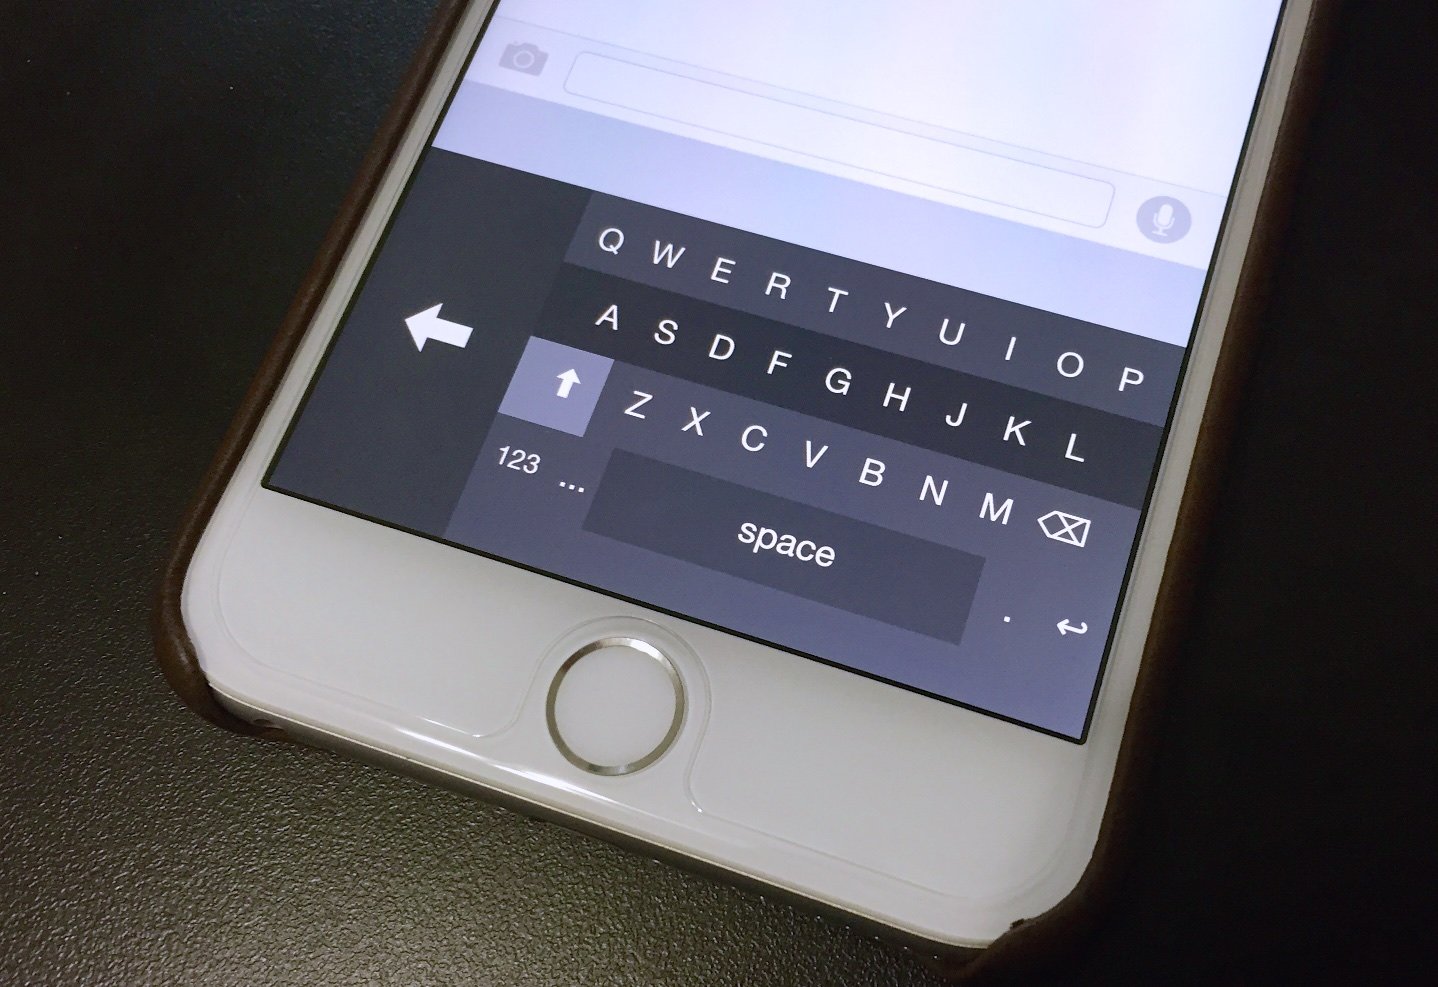 Here's how to use a one-handed iPhone 6 or iPhone 6 Plus keyboard.